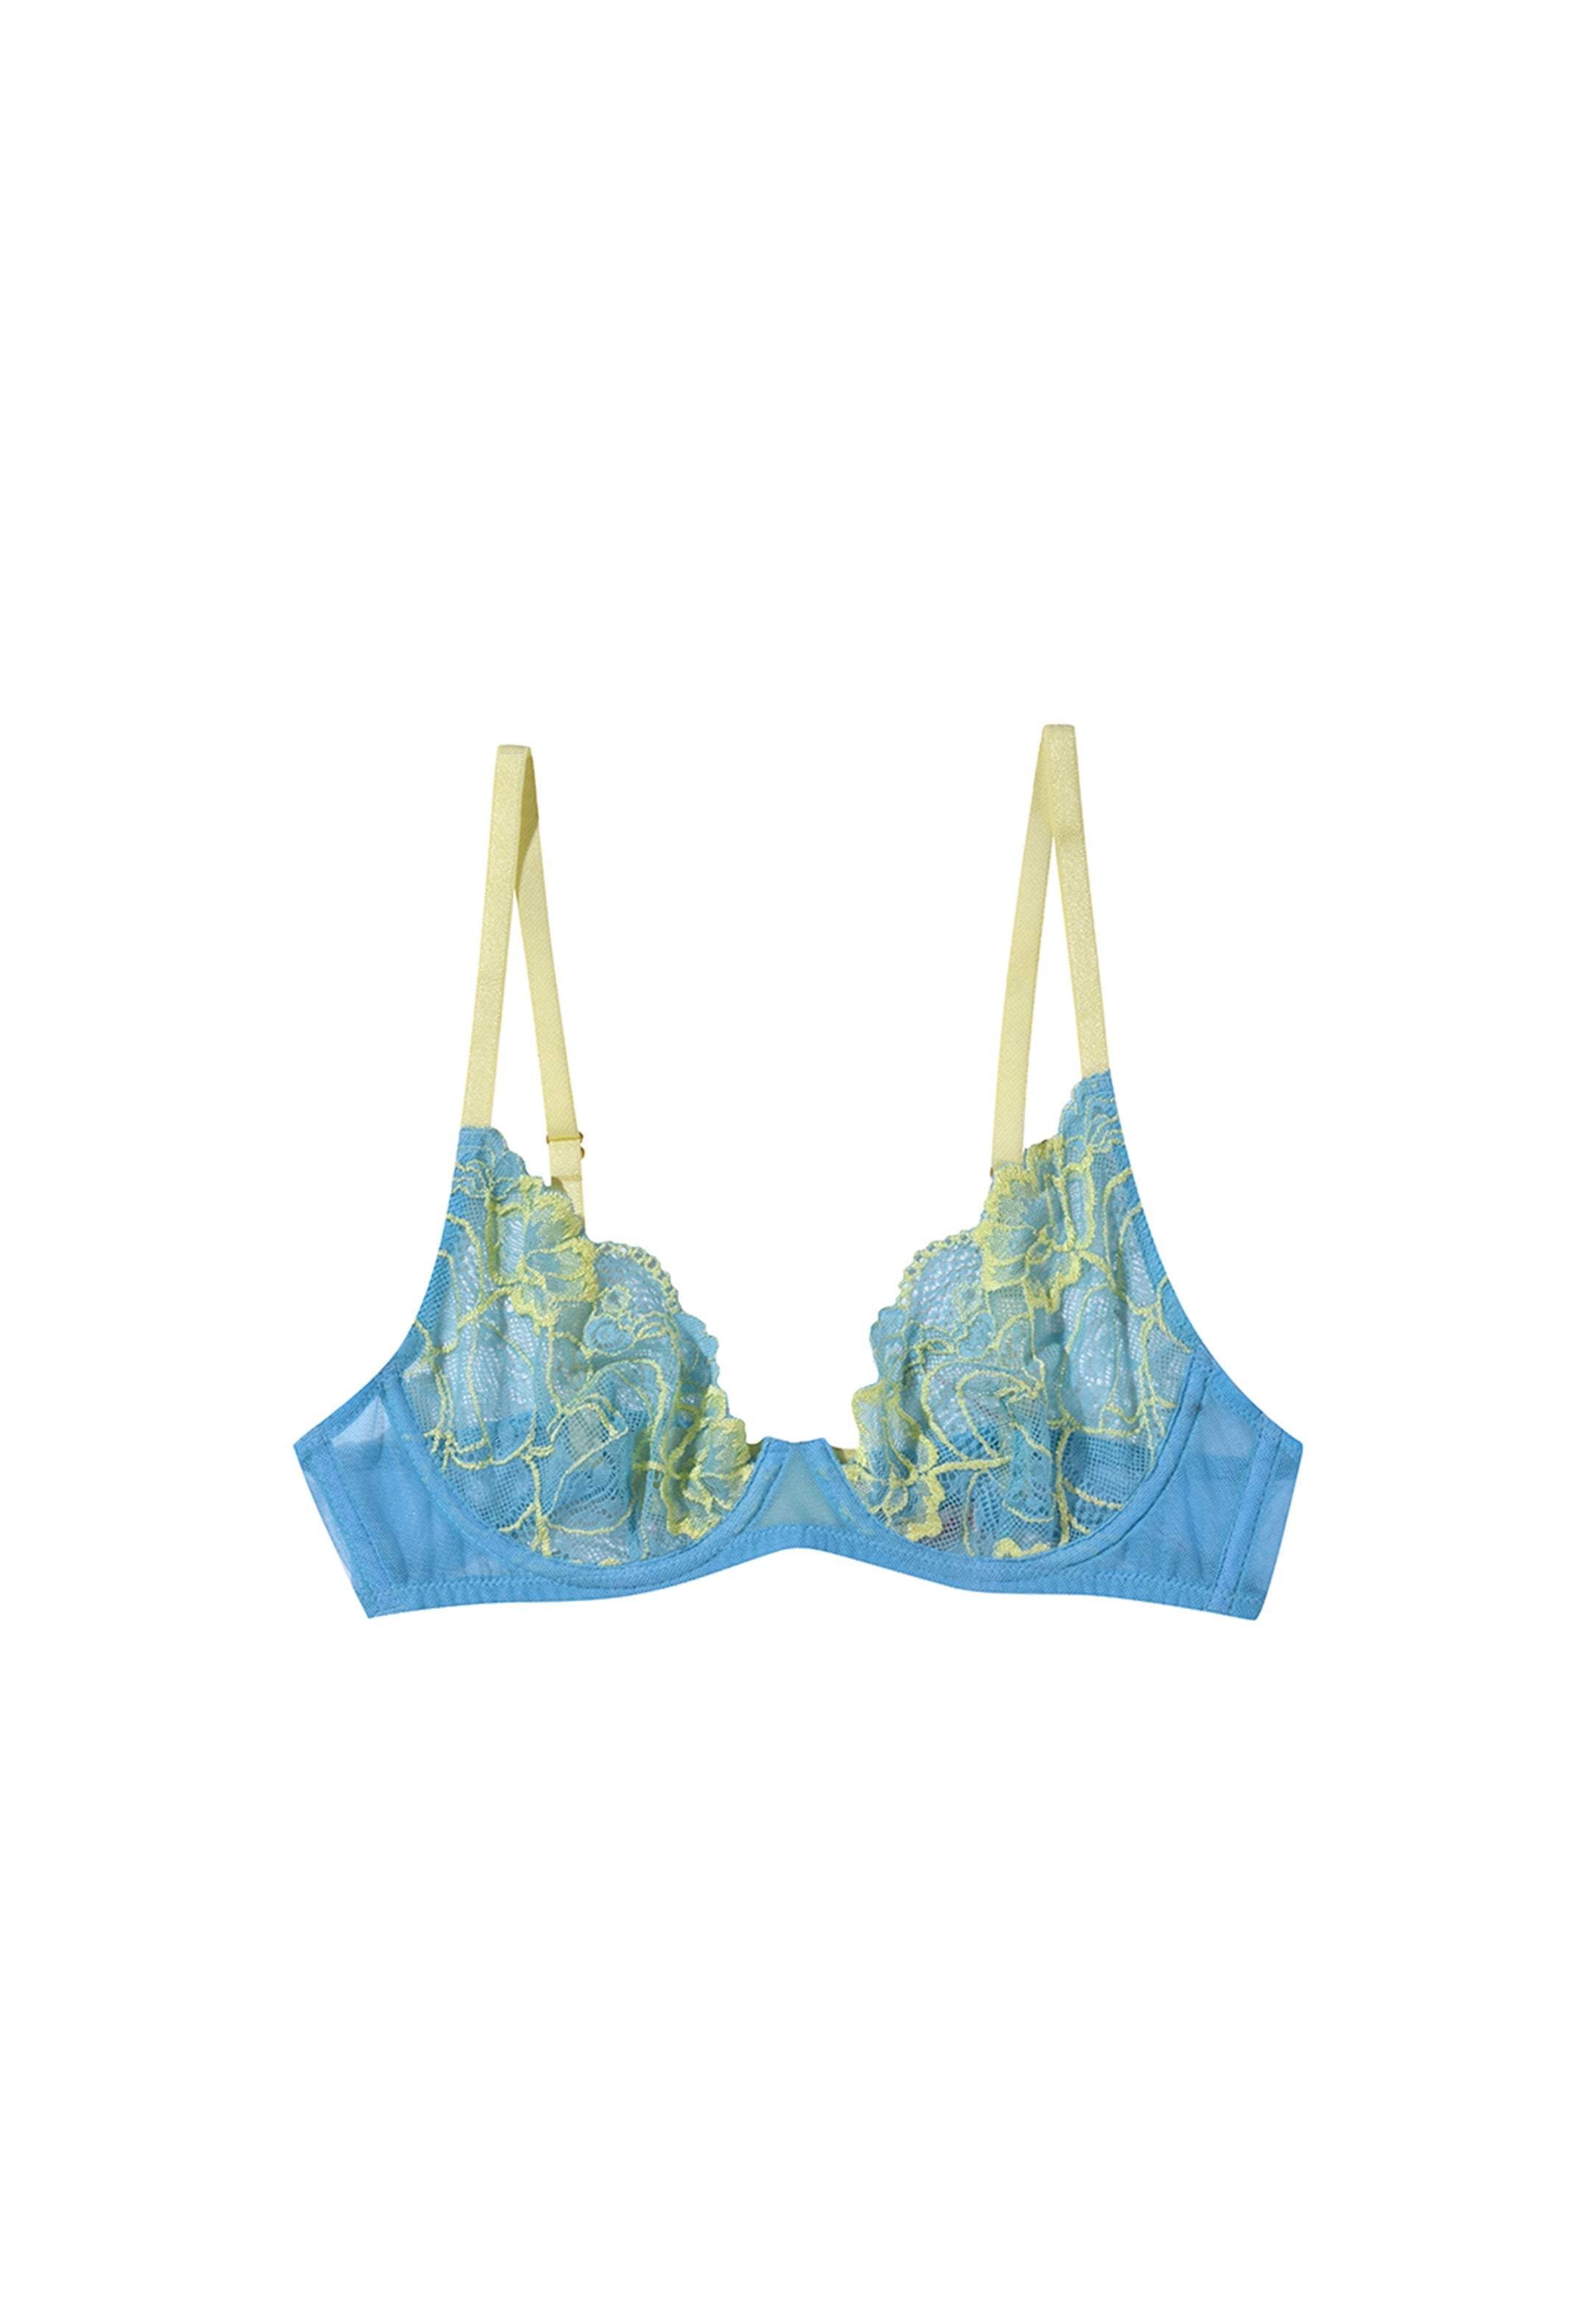 Forget Me Not Lace Bra